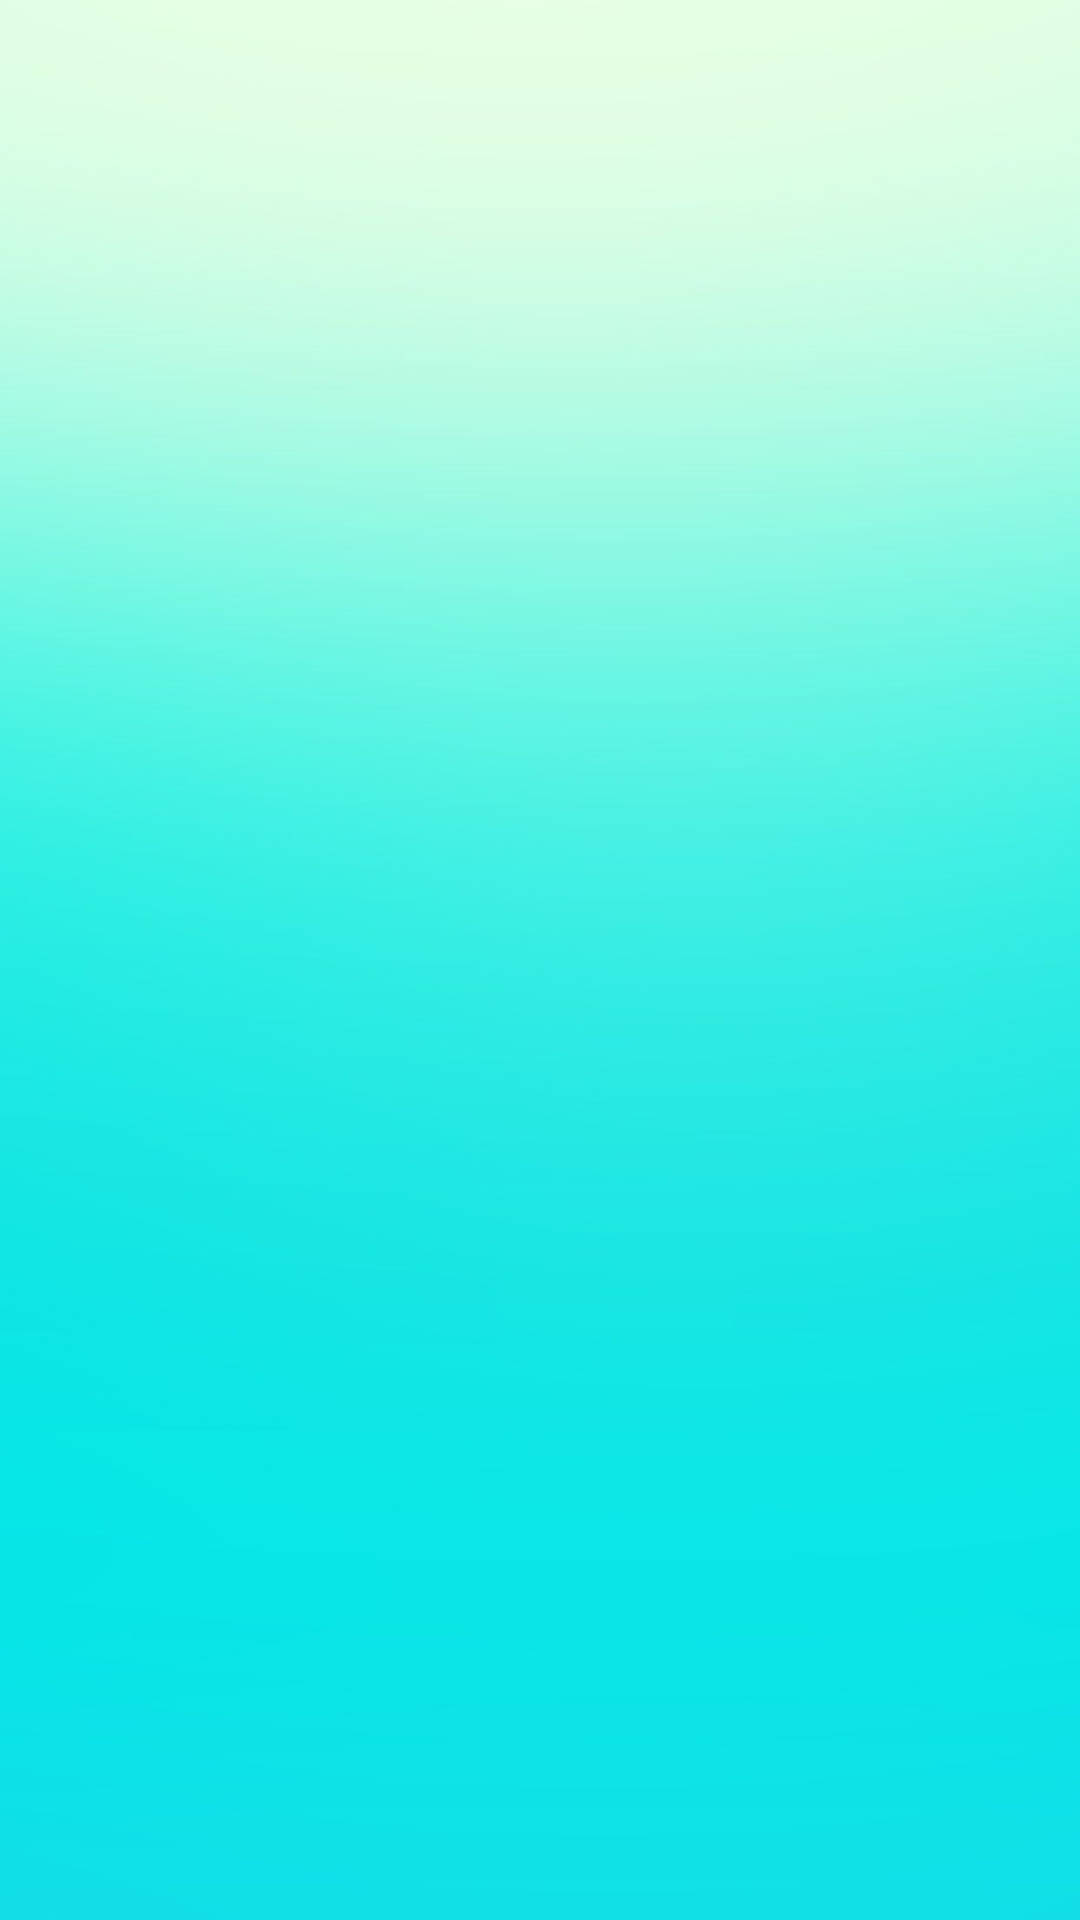 Gradient Pastel Green And Blue Wallpaper